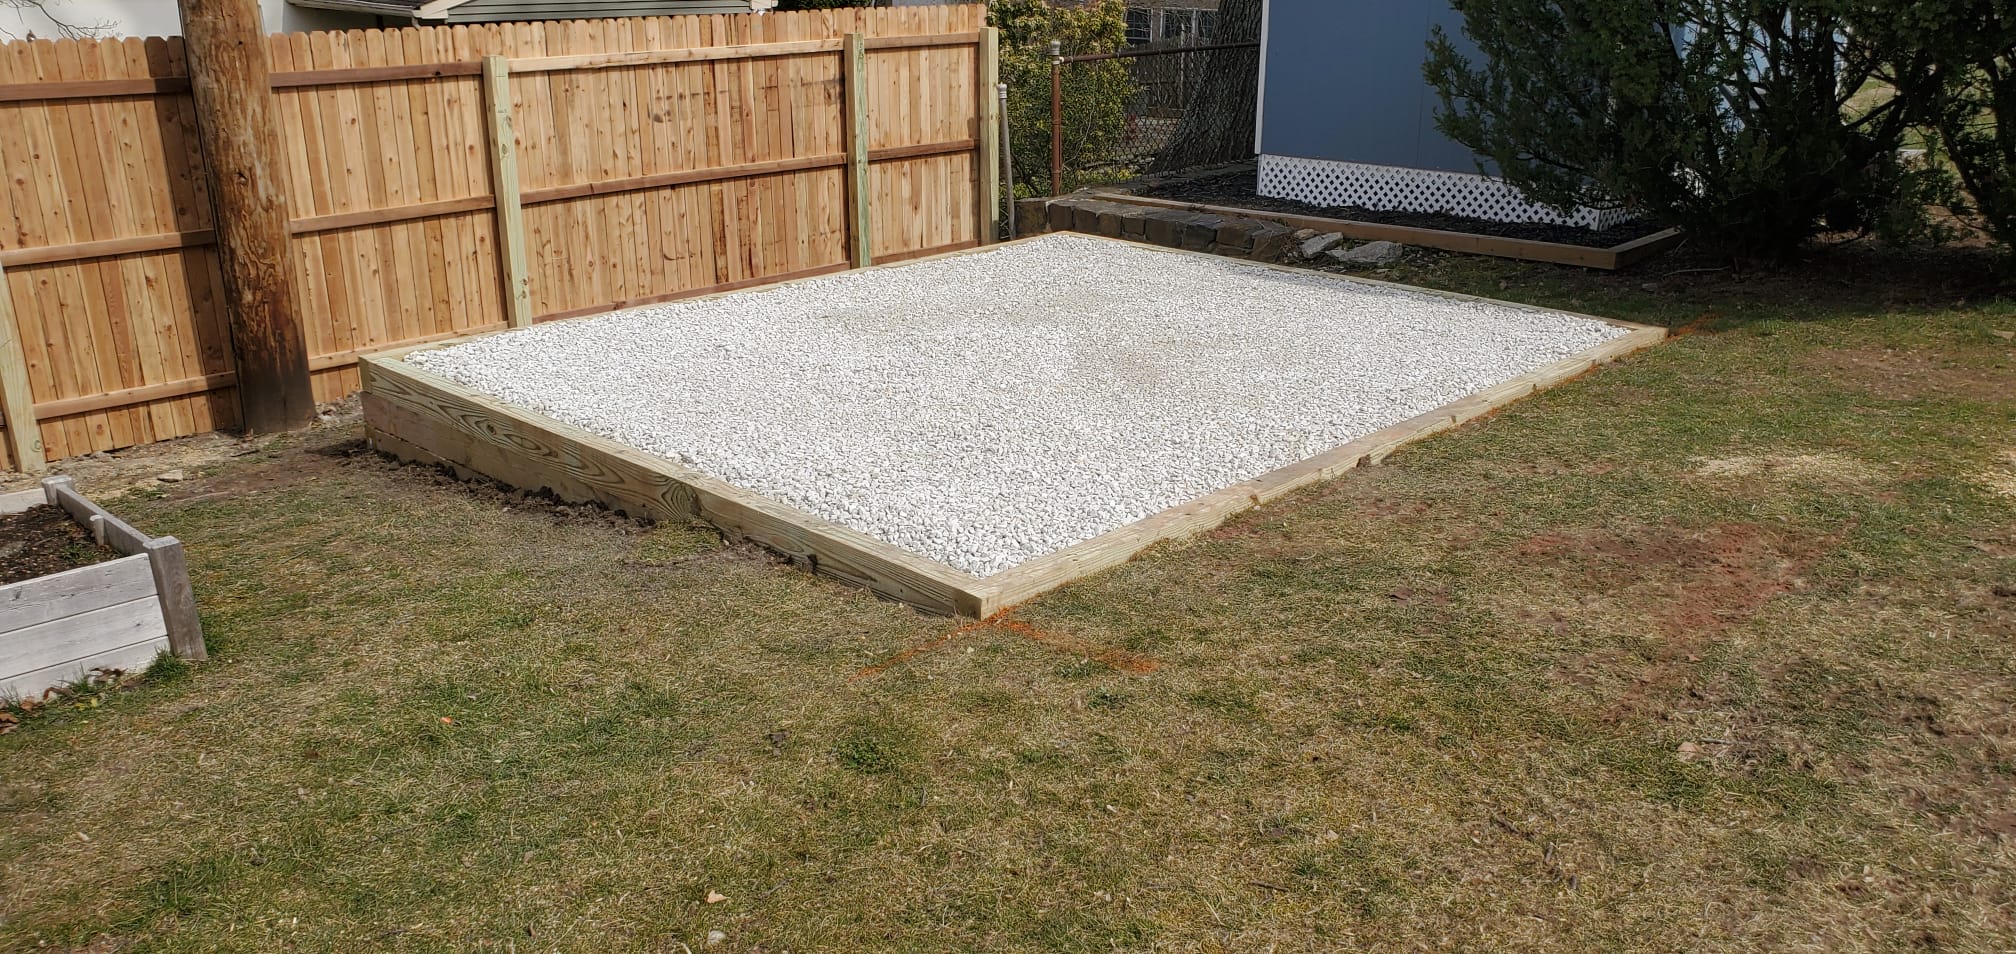 12x14 gravel shed pad in abington pa